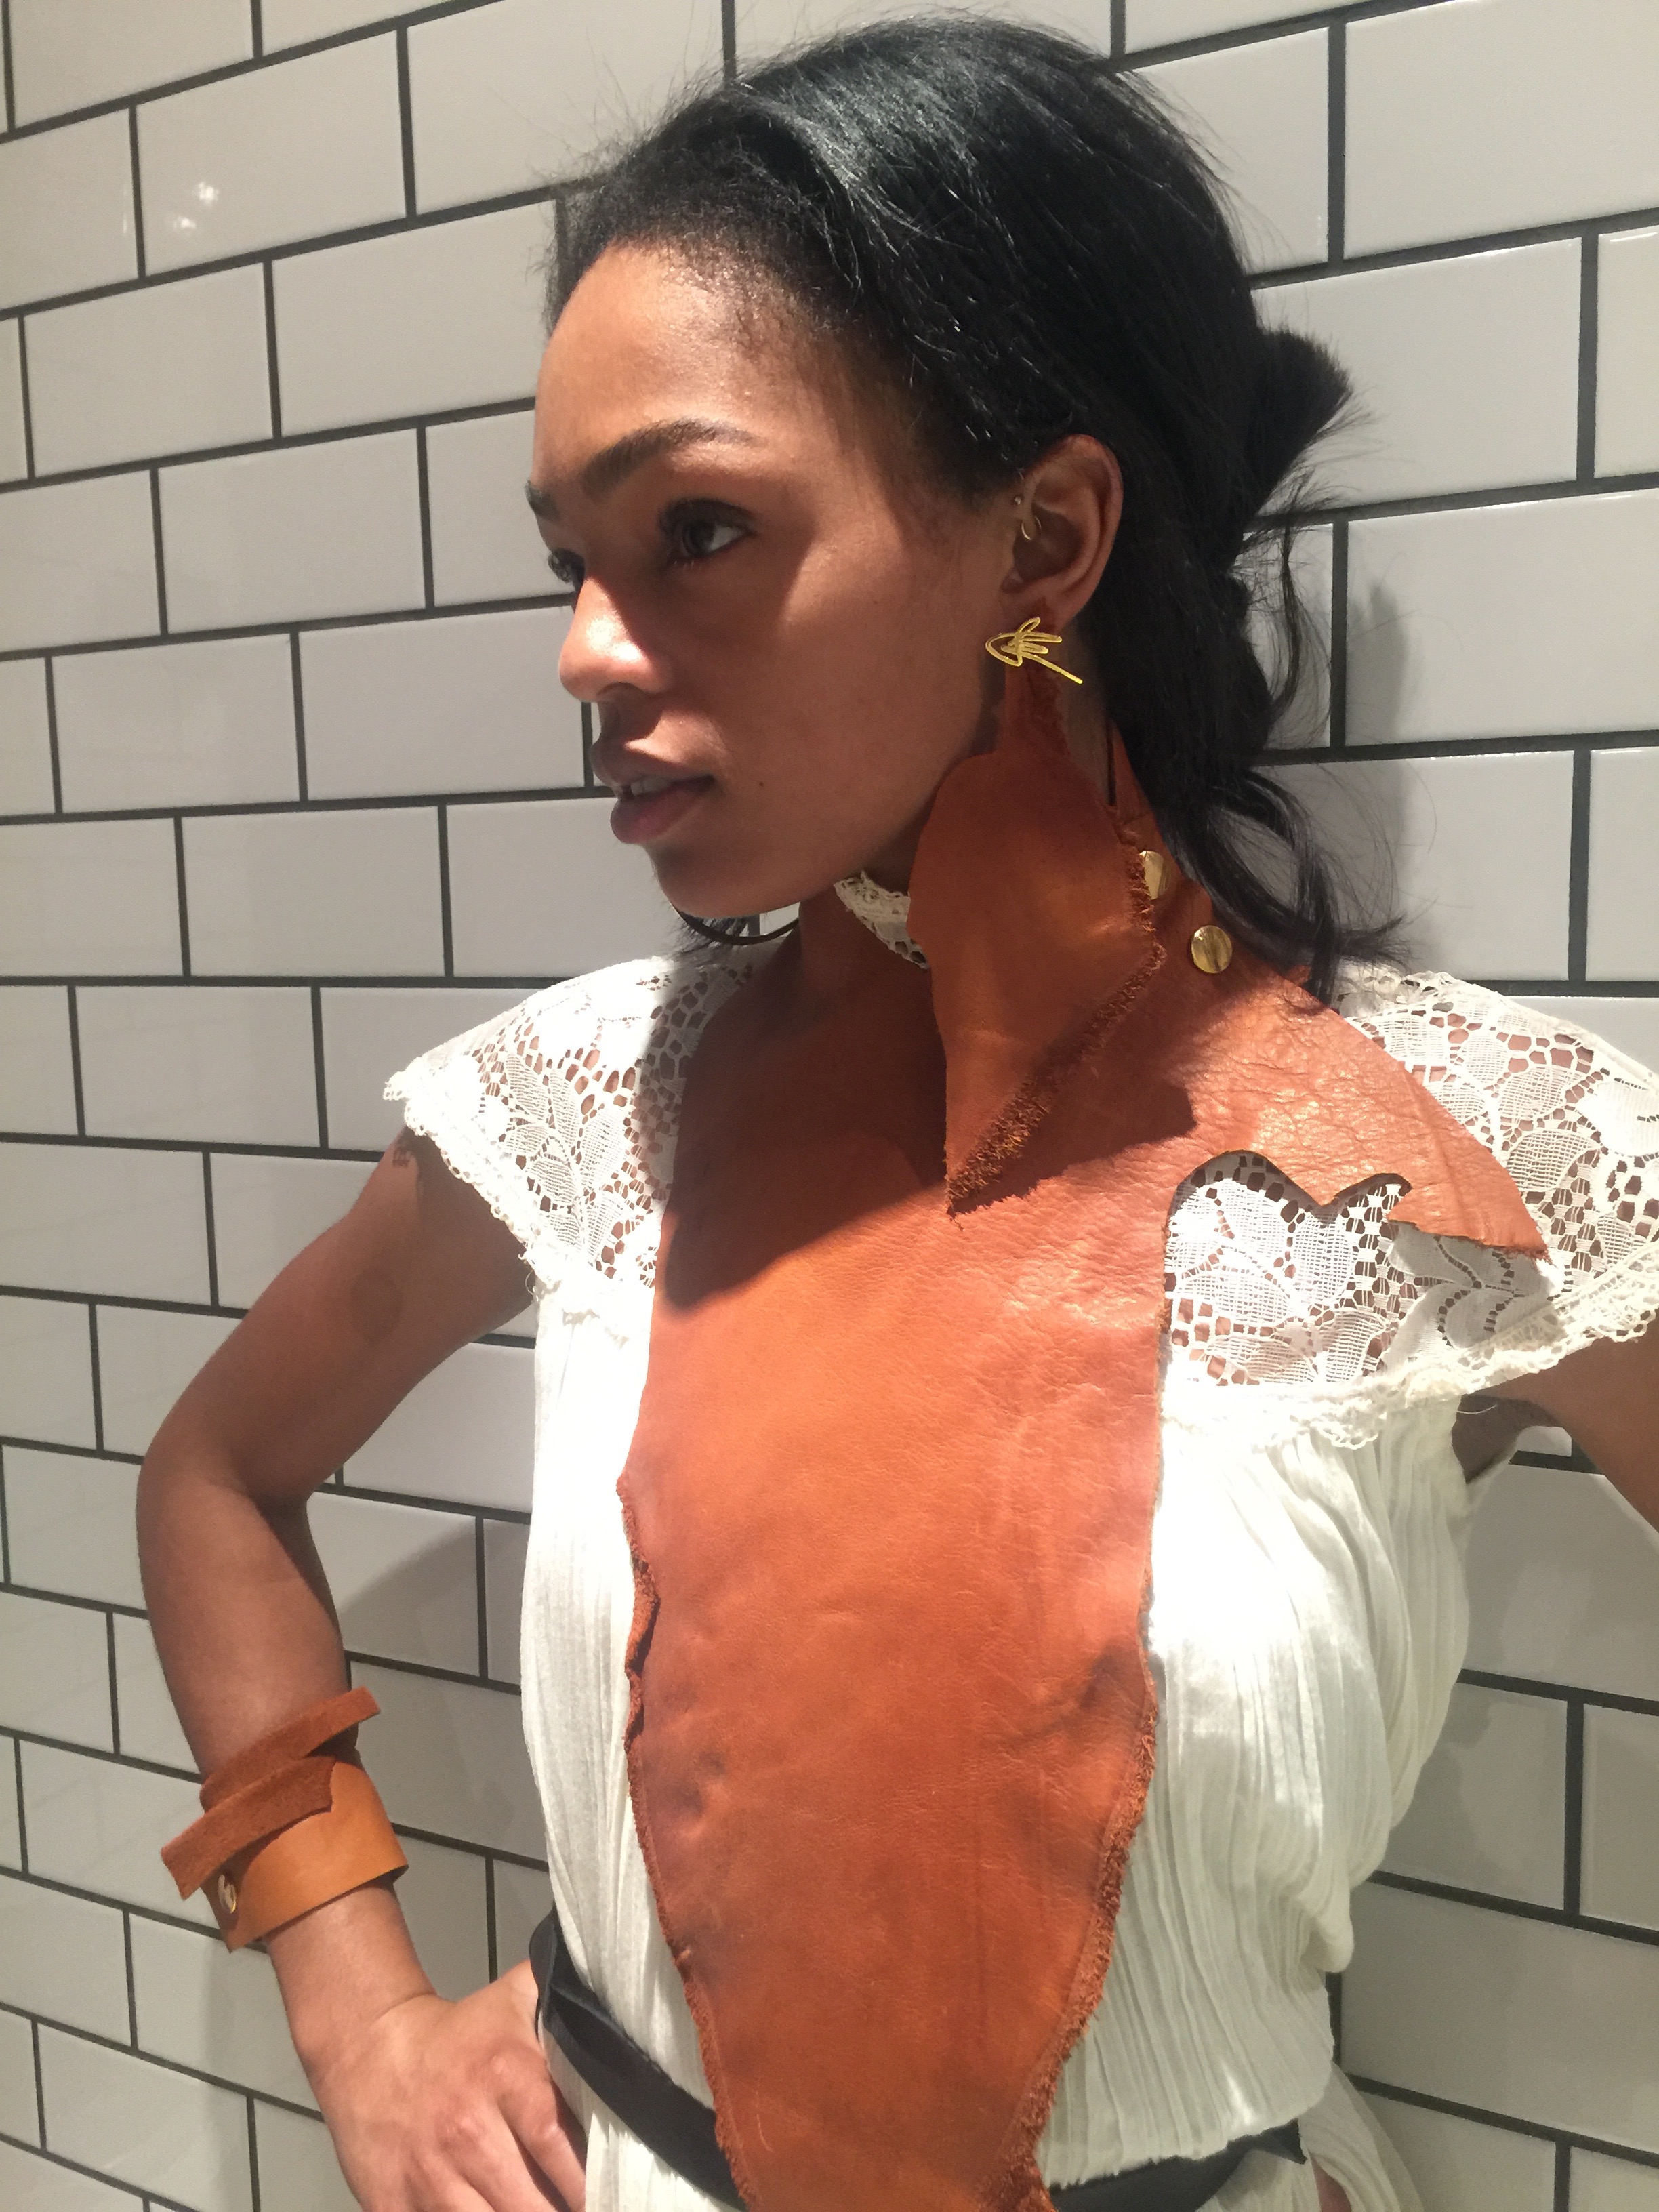 J.Elster The Jagged Folded Cuff in Natural on Selah Marley